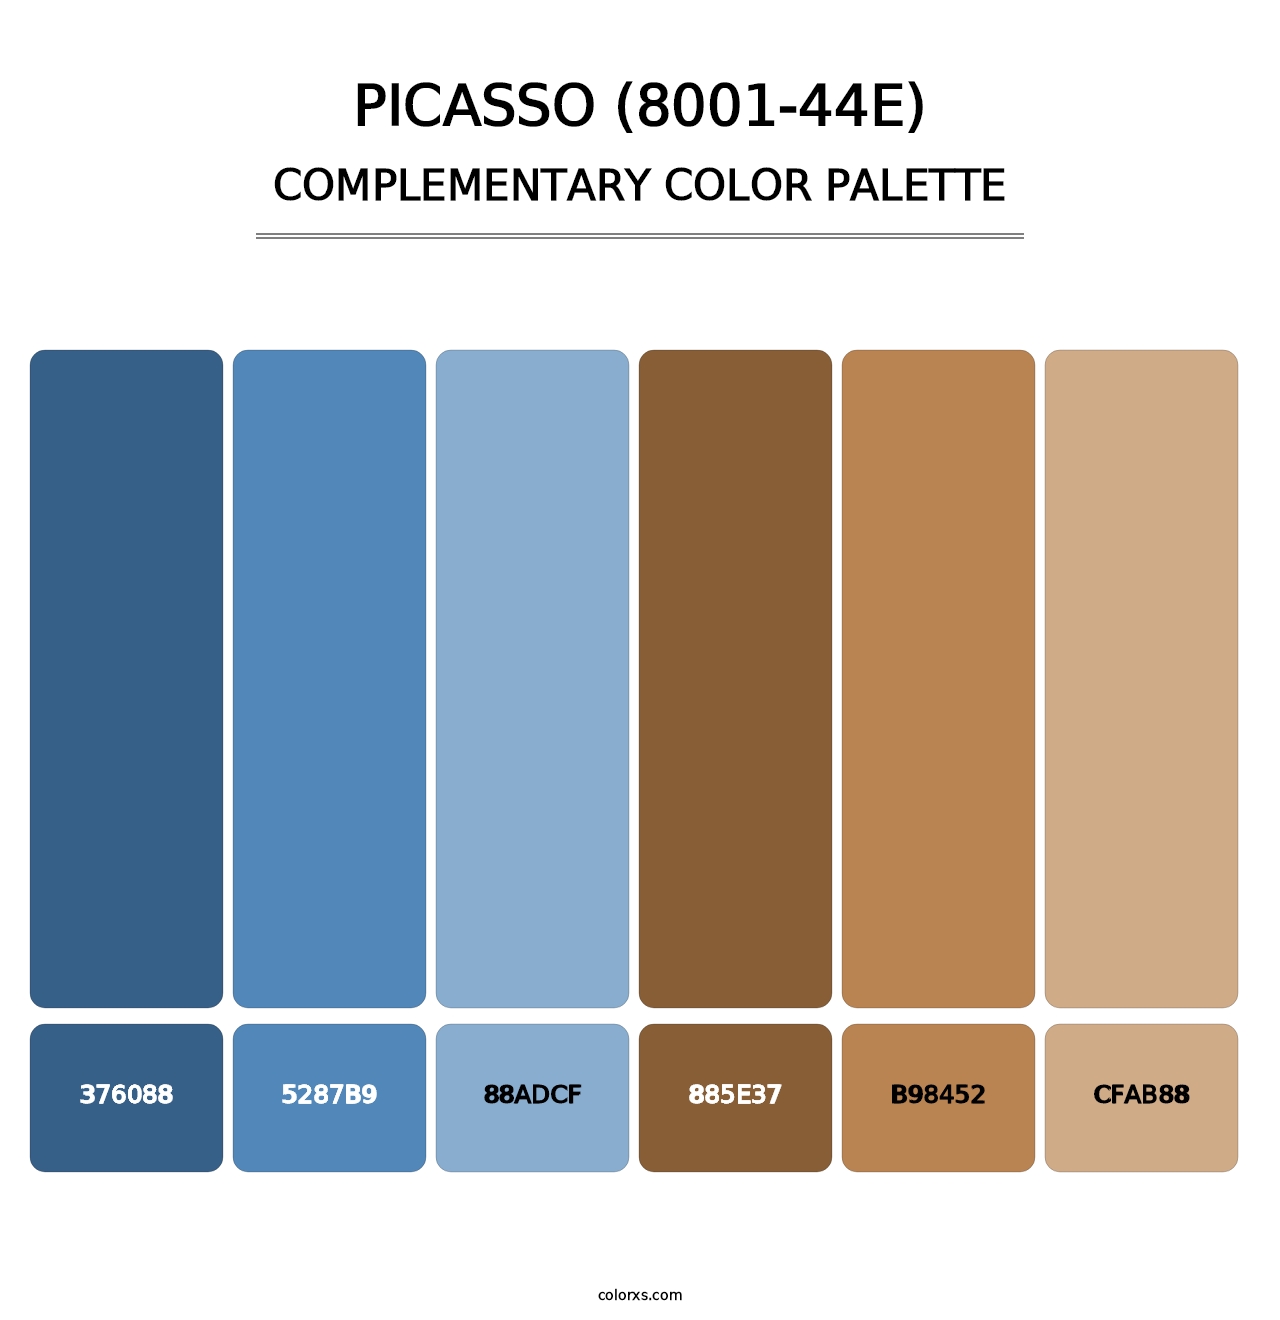 Picasso (8001-44E) - Complementary Color Palette